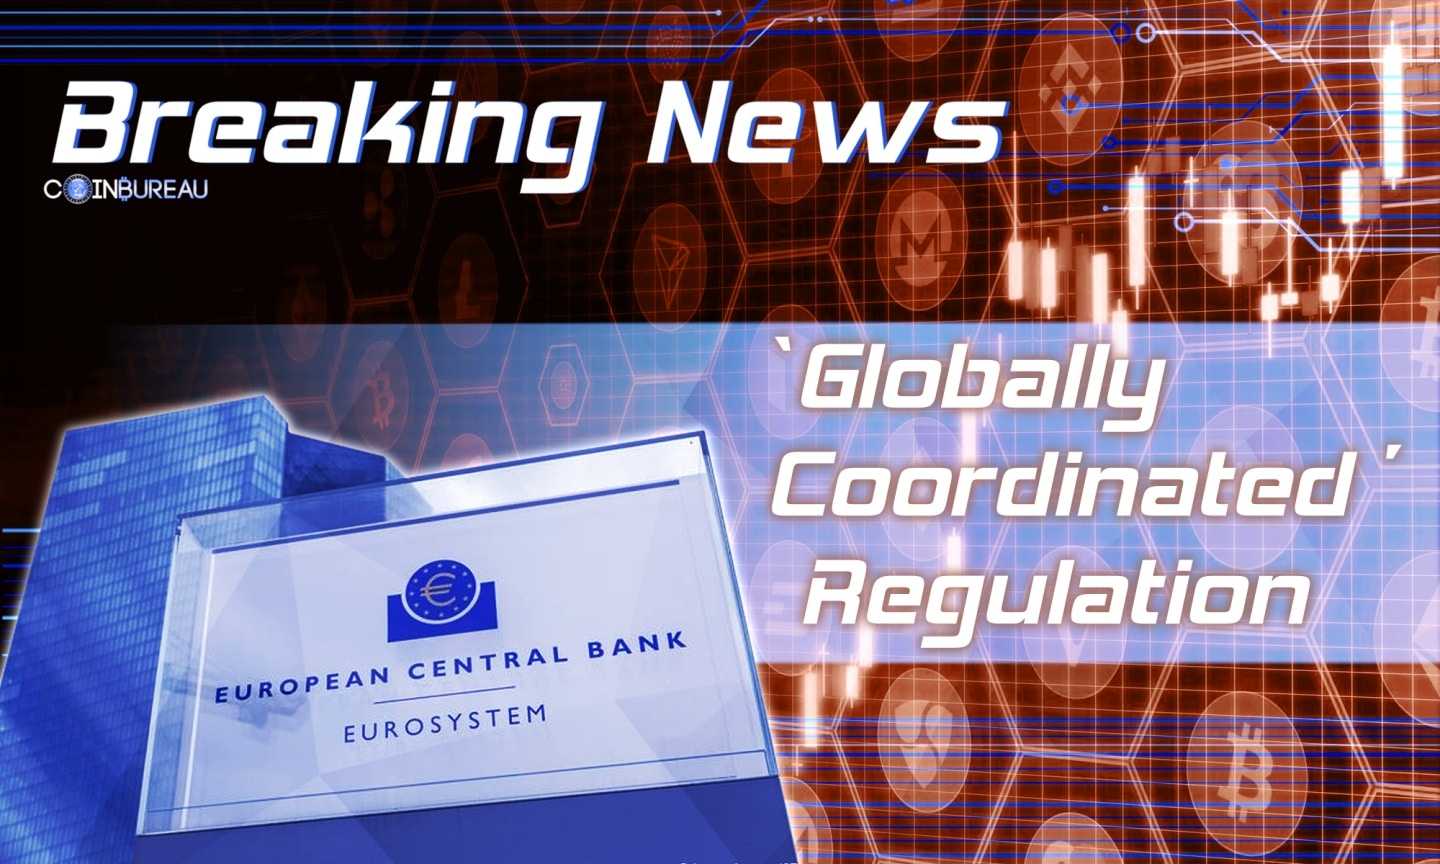 European Central Bank Calls For Globally Coordinated Regulation on Cryptocurrency